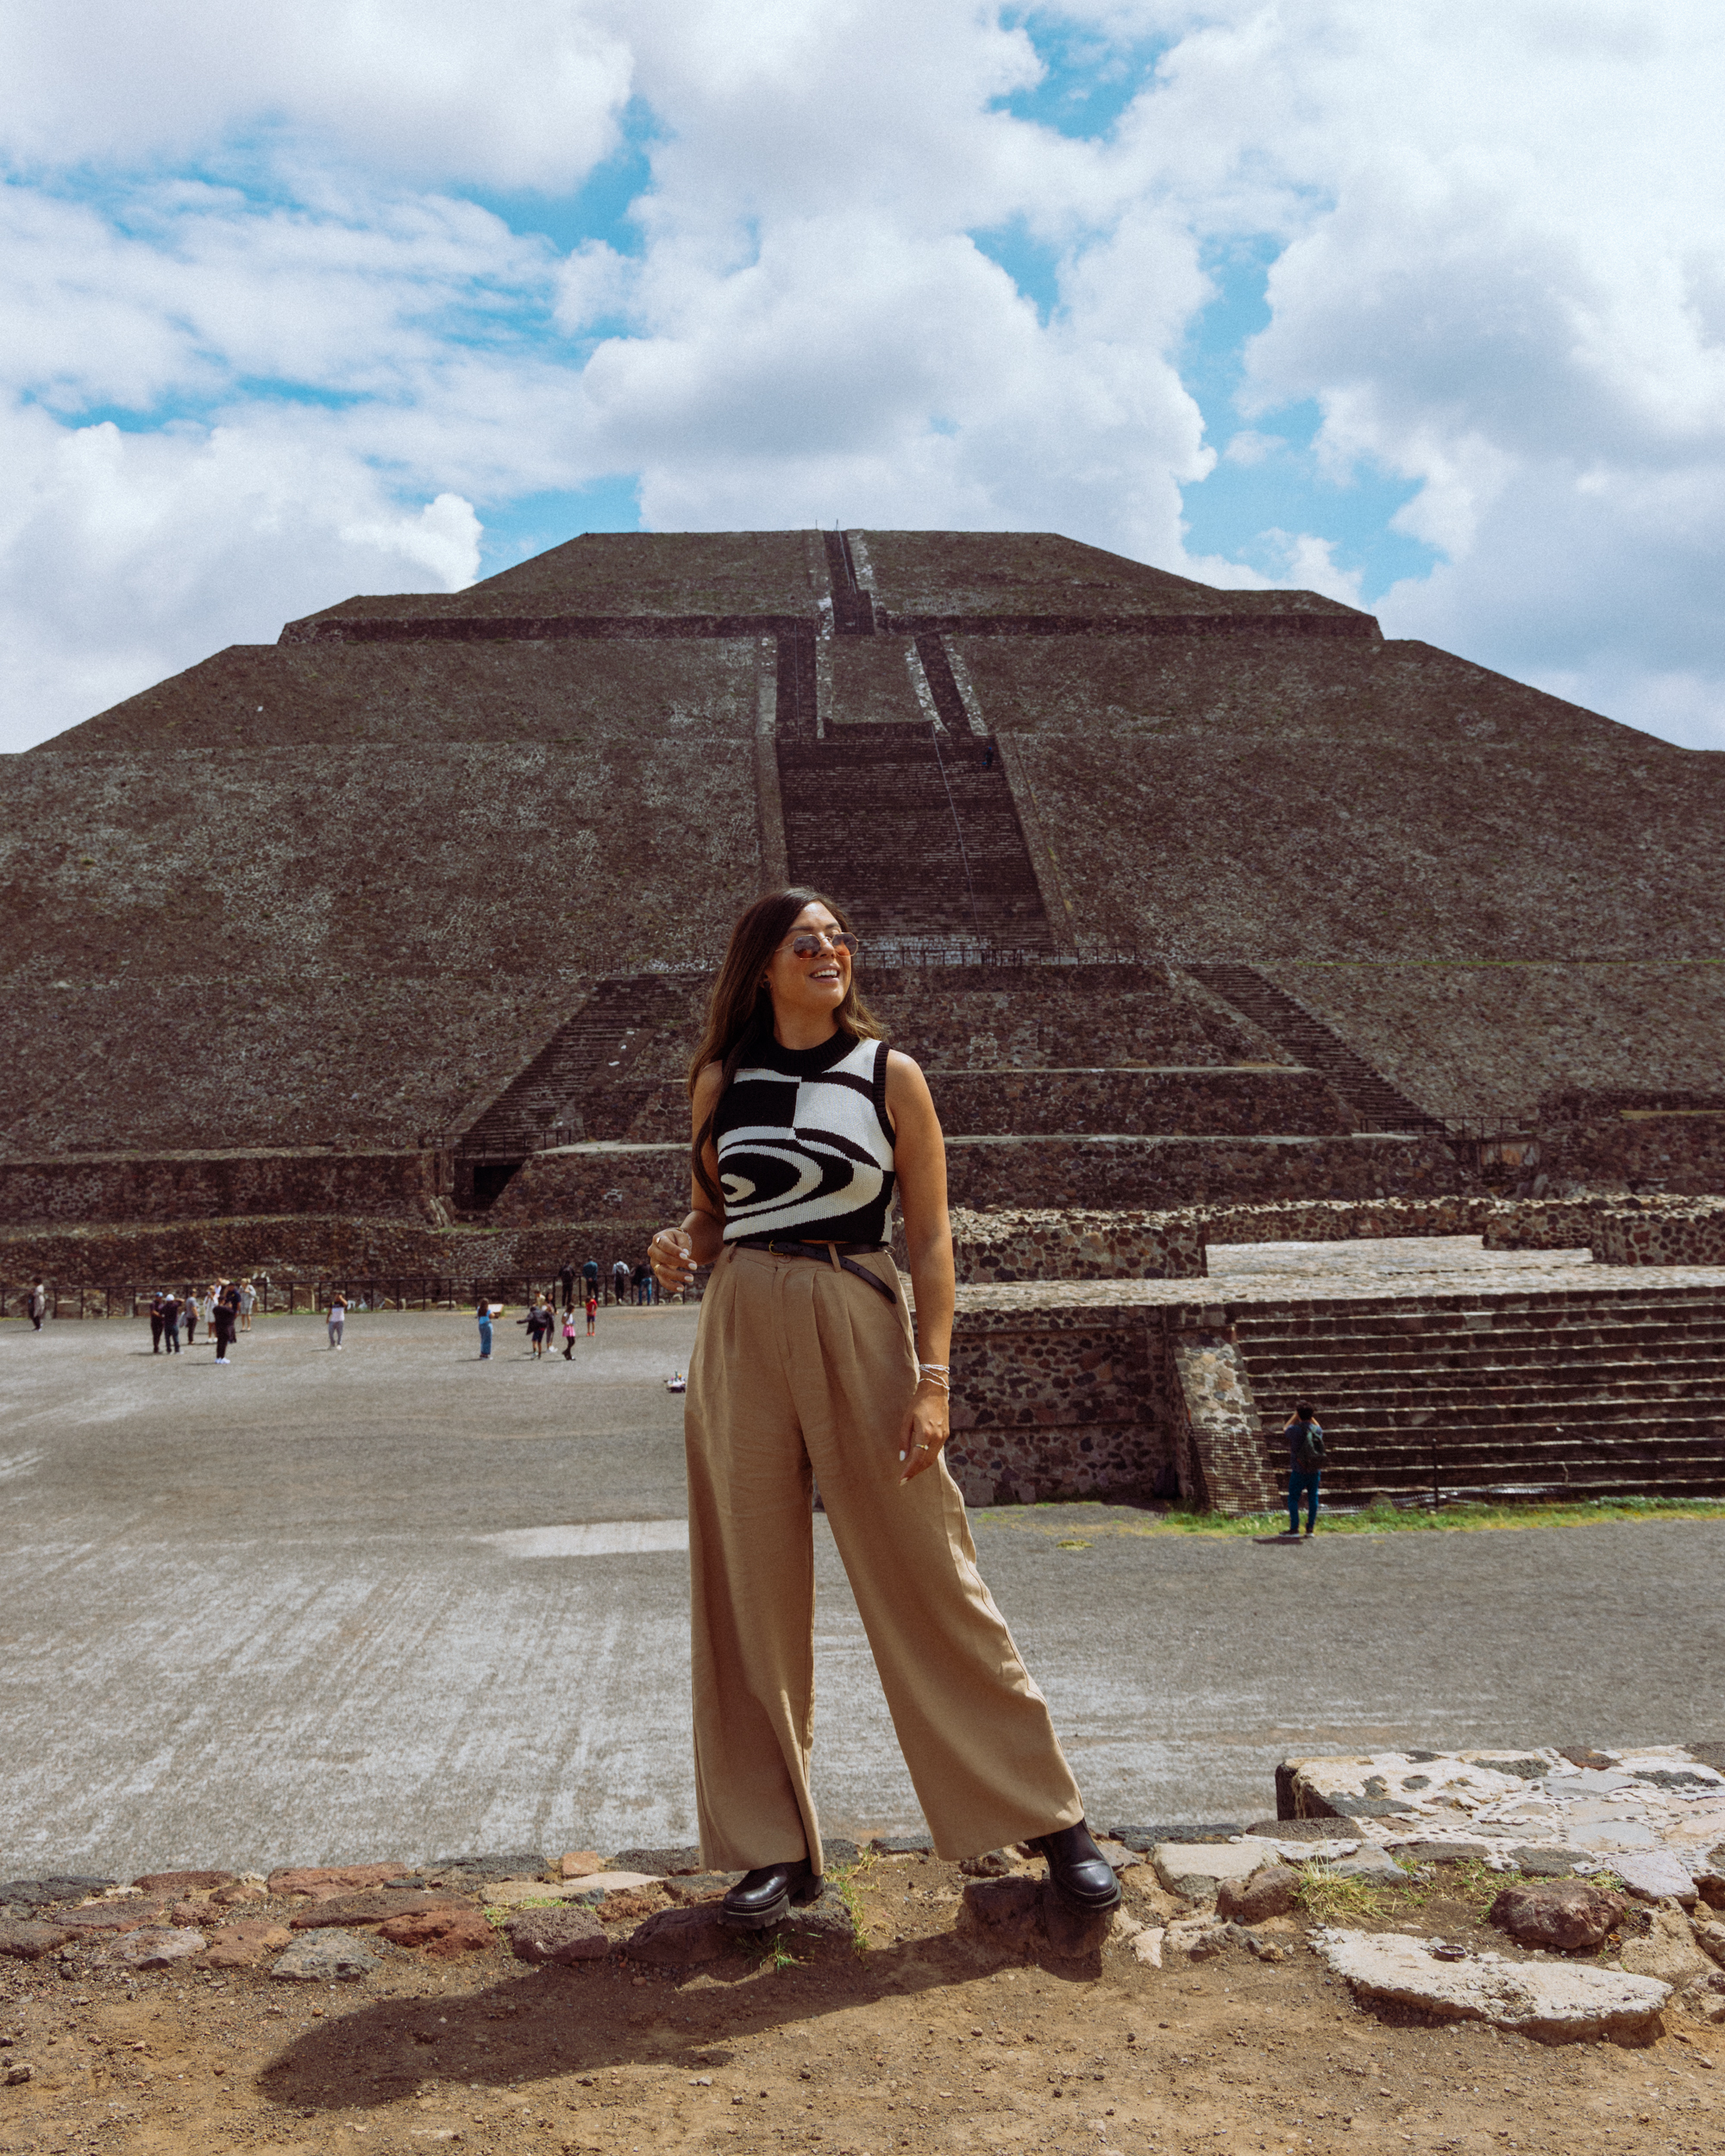 Rachel Off Duty: Visiting Teotihuacan in Mexico City